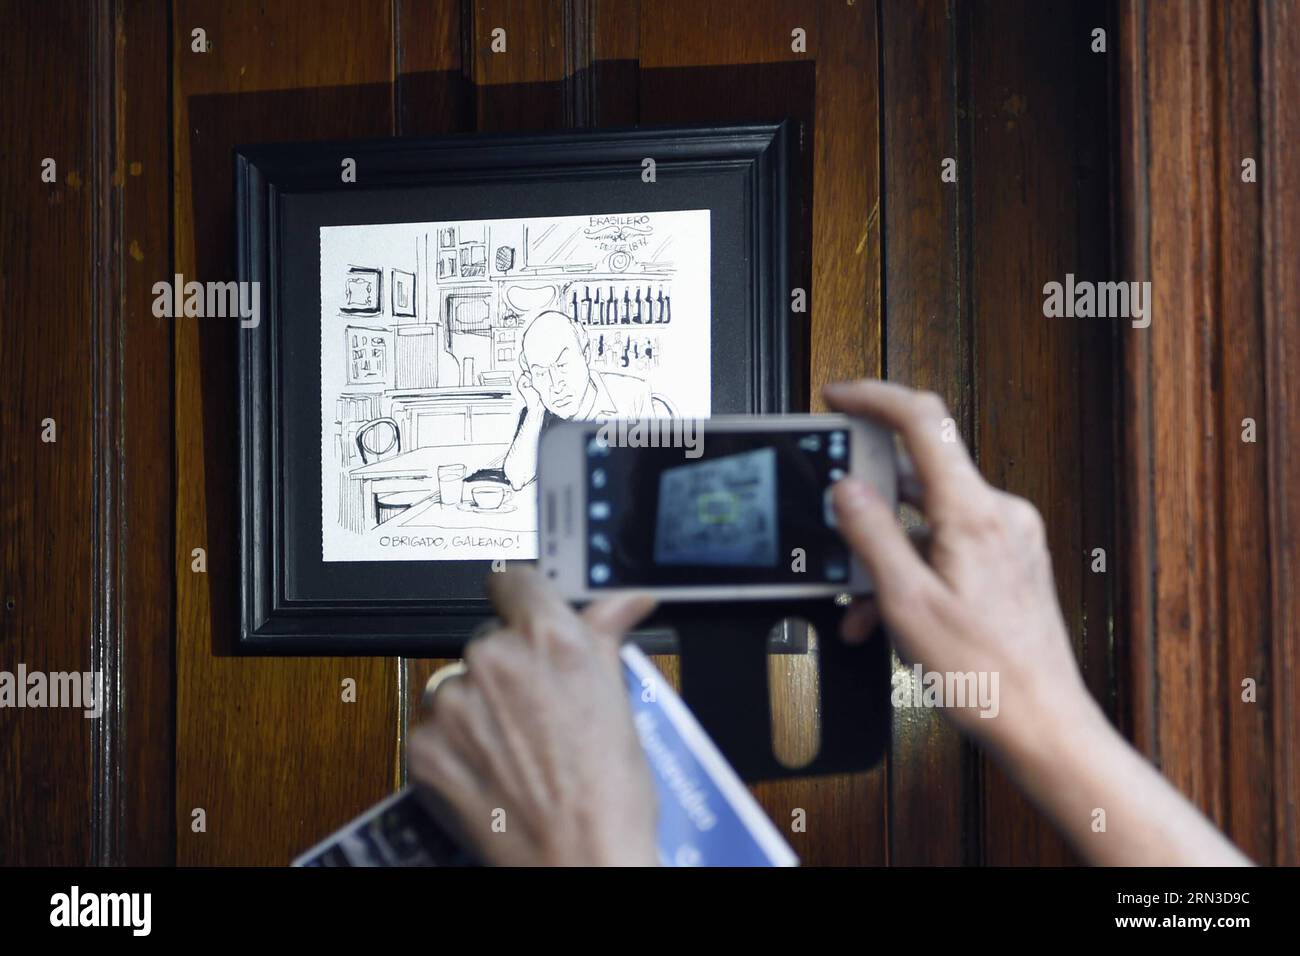 (150413) -- MONTEVIDEO, April 13, 2015 -- A tourist takes a picture of a cartoon of the Uruguayan writer, Eduardo Galeano, in the Cafe Brasilero , which he used to visit, in the Ciudad Vieja, in Montevideo, capital of Uruguay, on April 13, 2015. Uruguayan writer Eduardo Galeano, author of Open Veins of Latin America , died on Monday in Montevideo at 74 years old. Nicolas Celaya) (rtg) URUGUAY-MONTEVIDEO-CULTURE-EDUARDO GALEANO e NICOLASxCELAYA PUBLICATIONxNOTxINxCHN   Montevideo April 13 2015 a Tourist Takes a Picture of a Cartoon of The Uruguayan Writer Eduardo Galeano in The Cafe Brasilero W Stock Photo